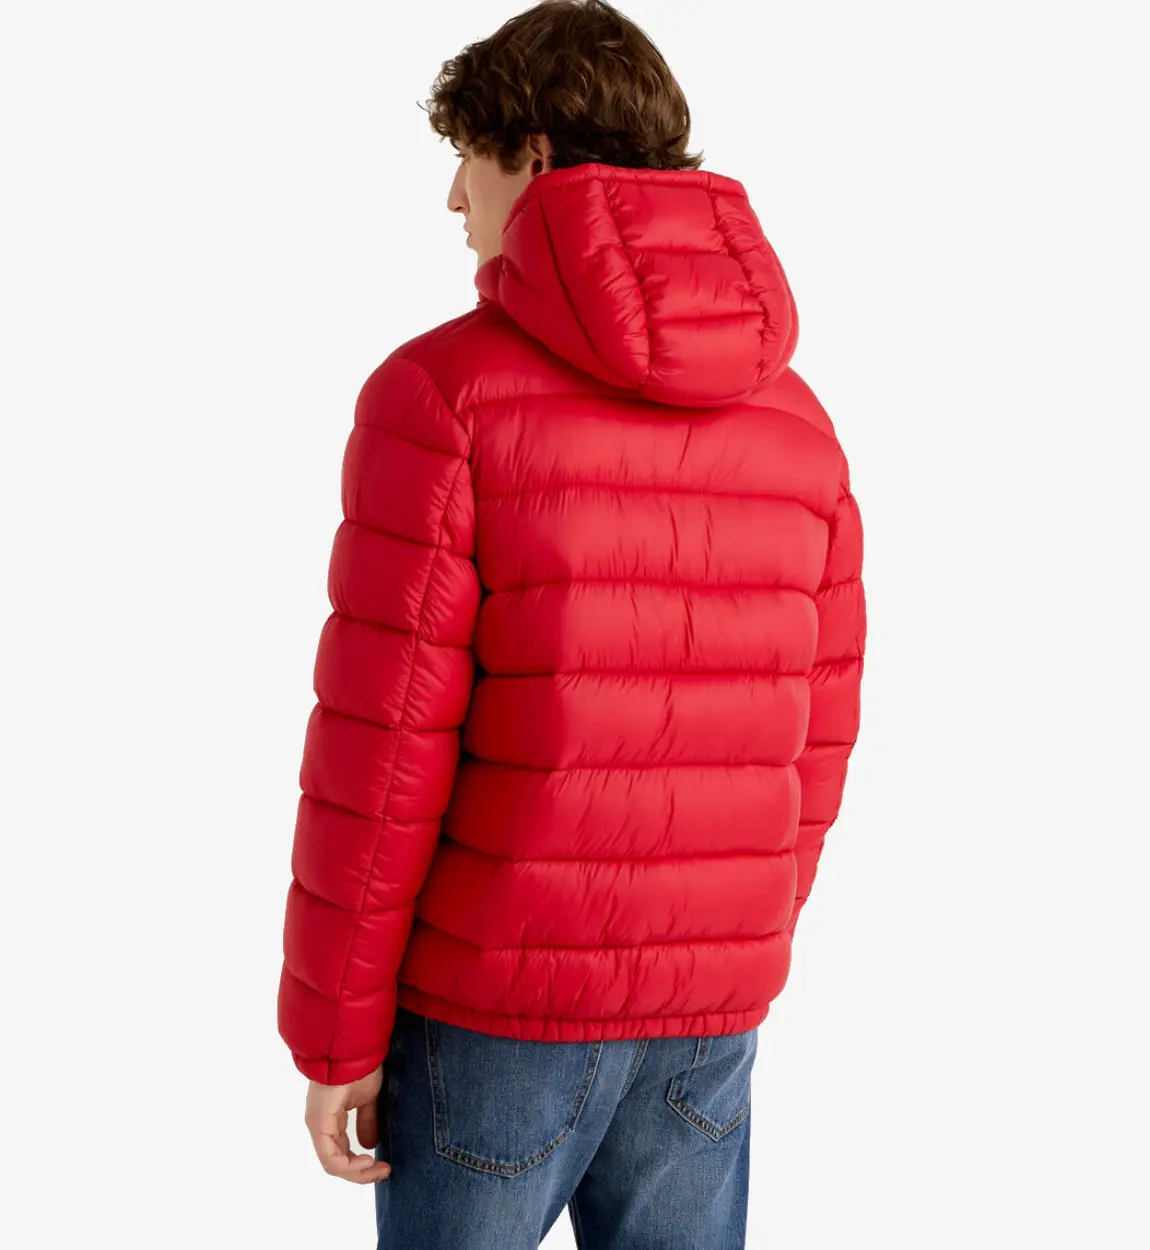 Red_Puffer_Jacket_Tendon_Sports (1)